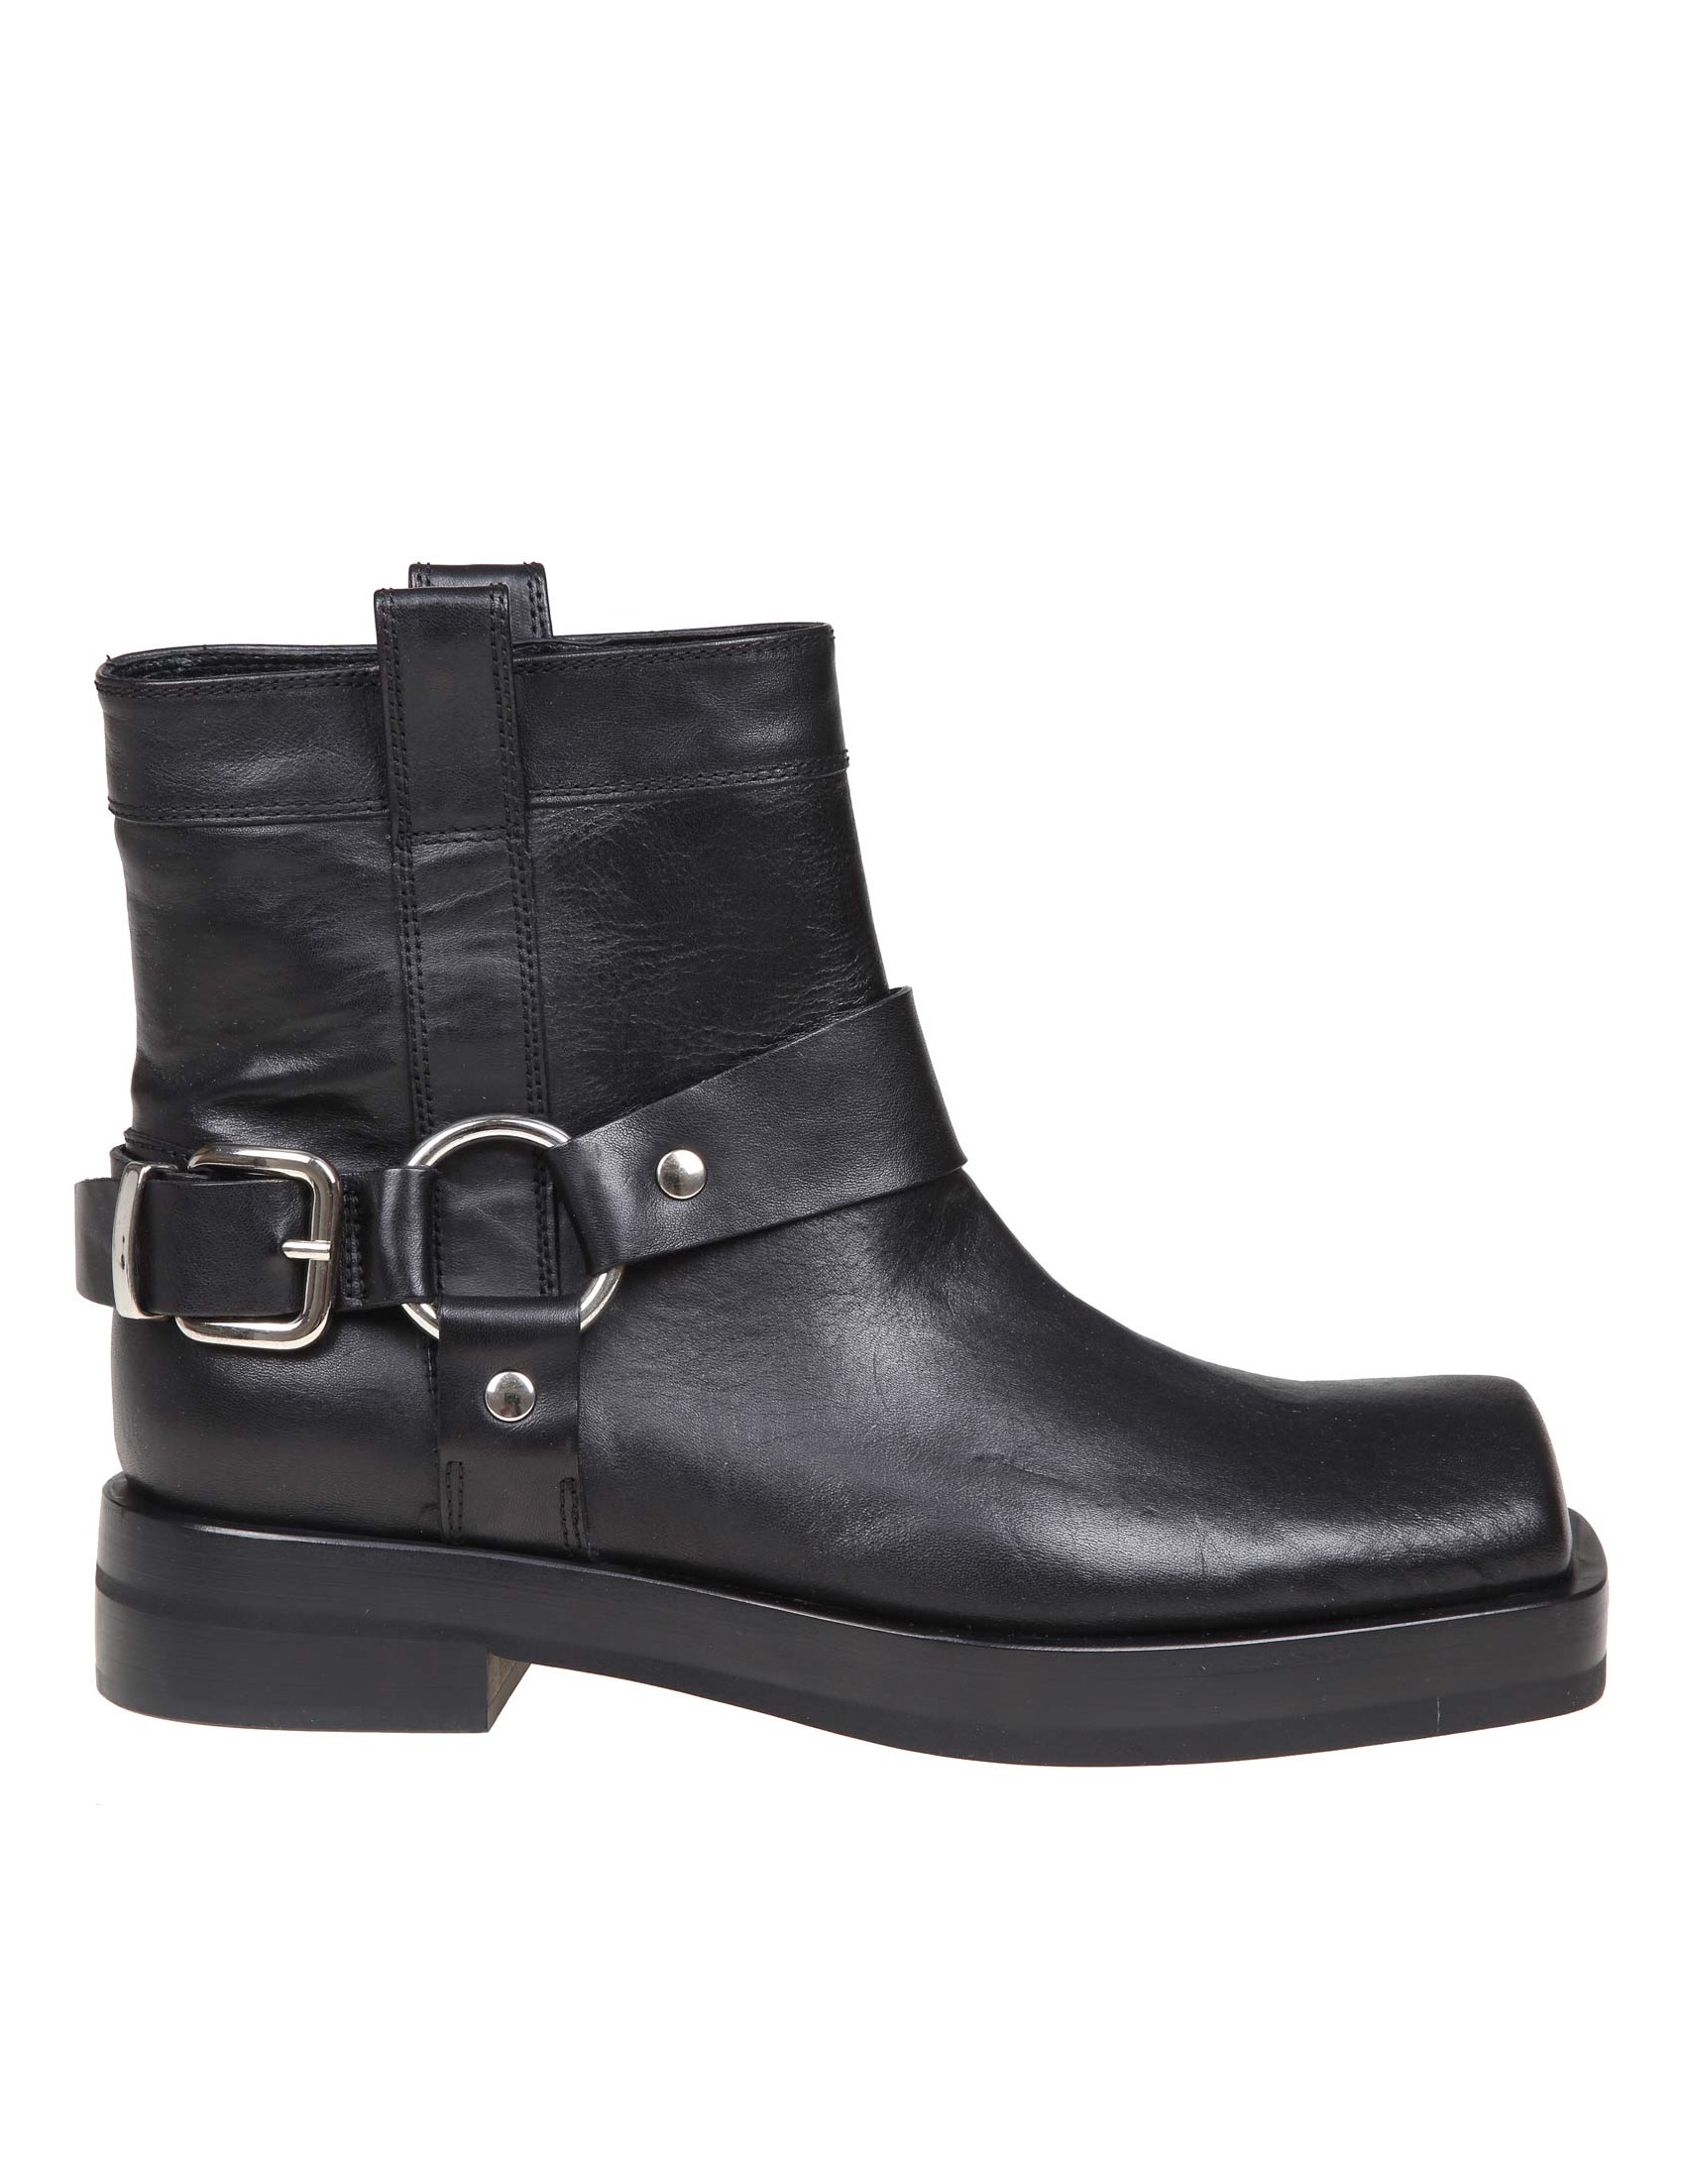 AGL RINA ANKLE BOOTS IN BLACK LEATHER